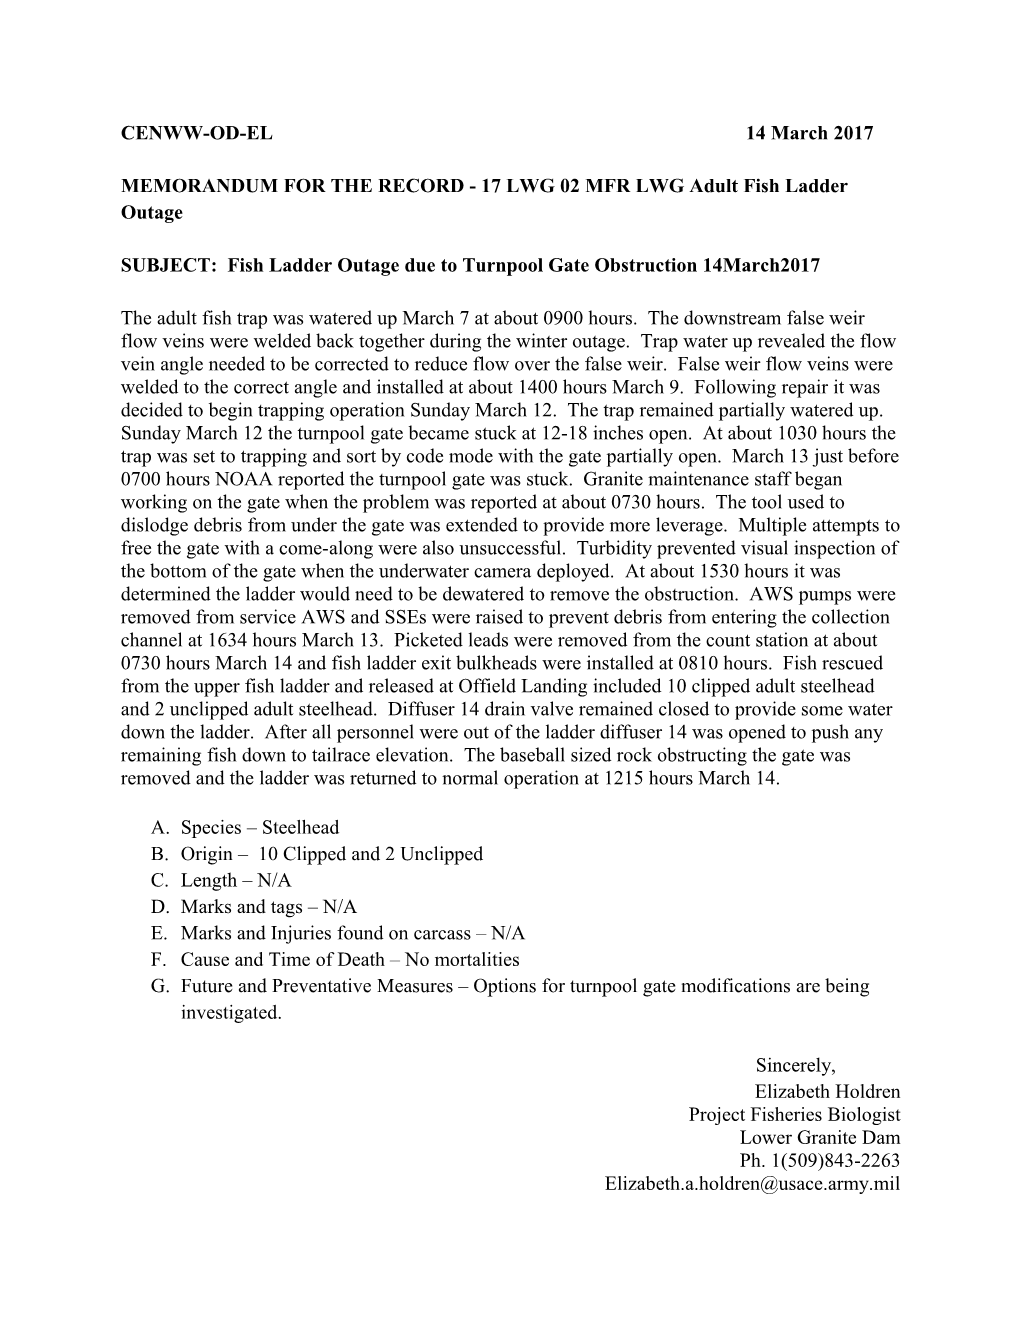 MEMORANDUM for the RECORD - 17 LWG02 MFR LWG Adult Fish Ladder Outage